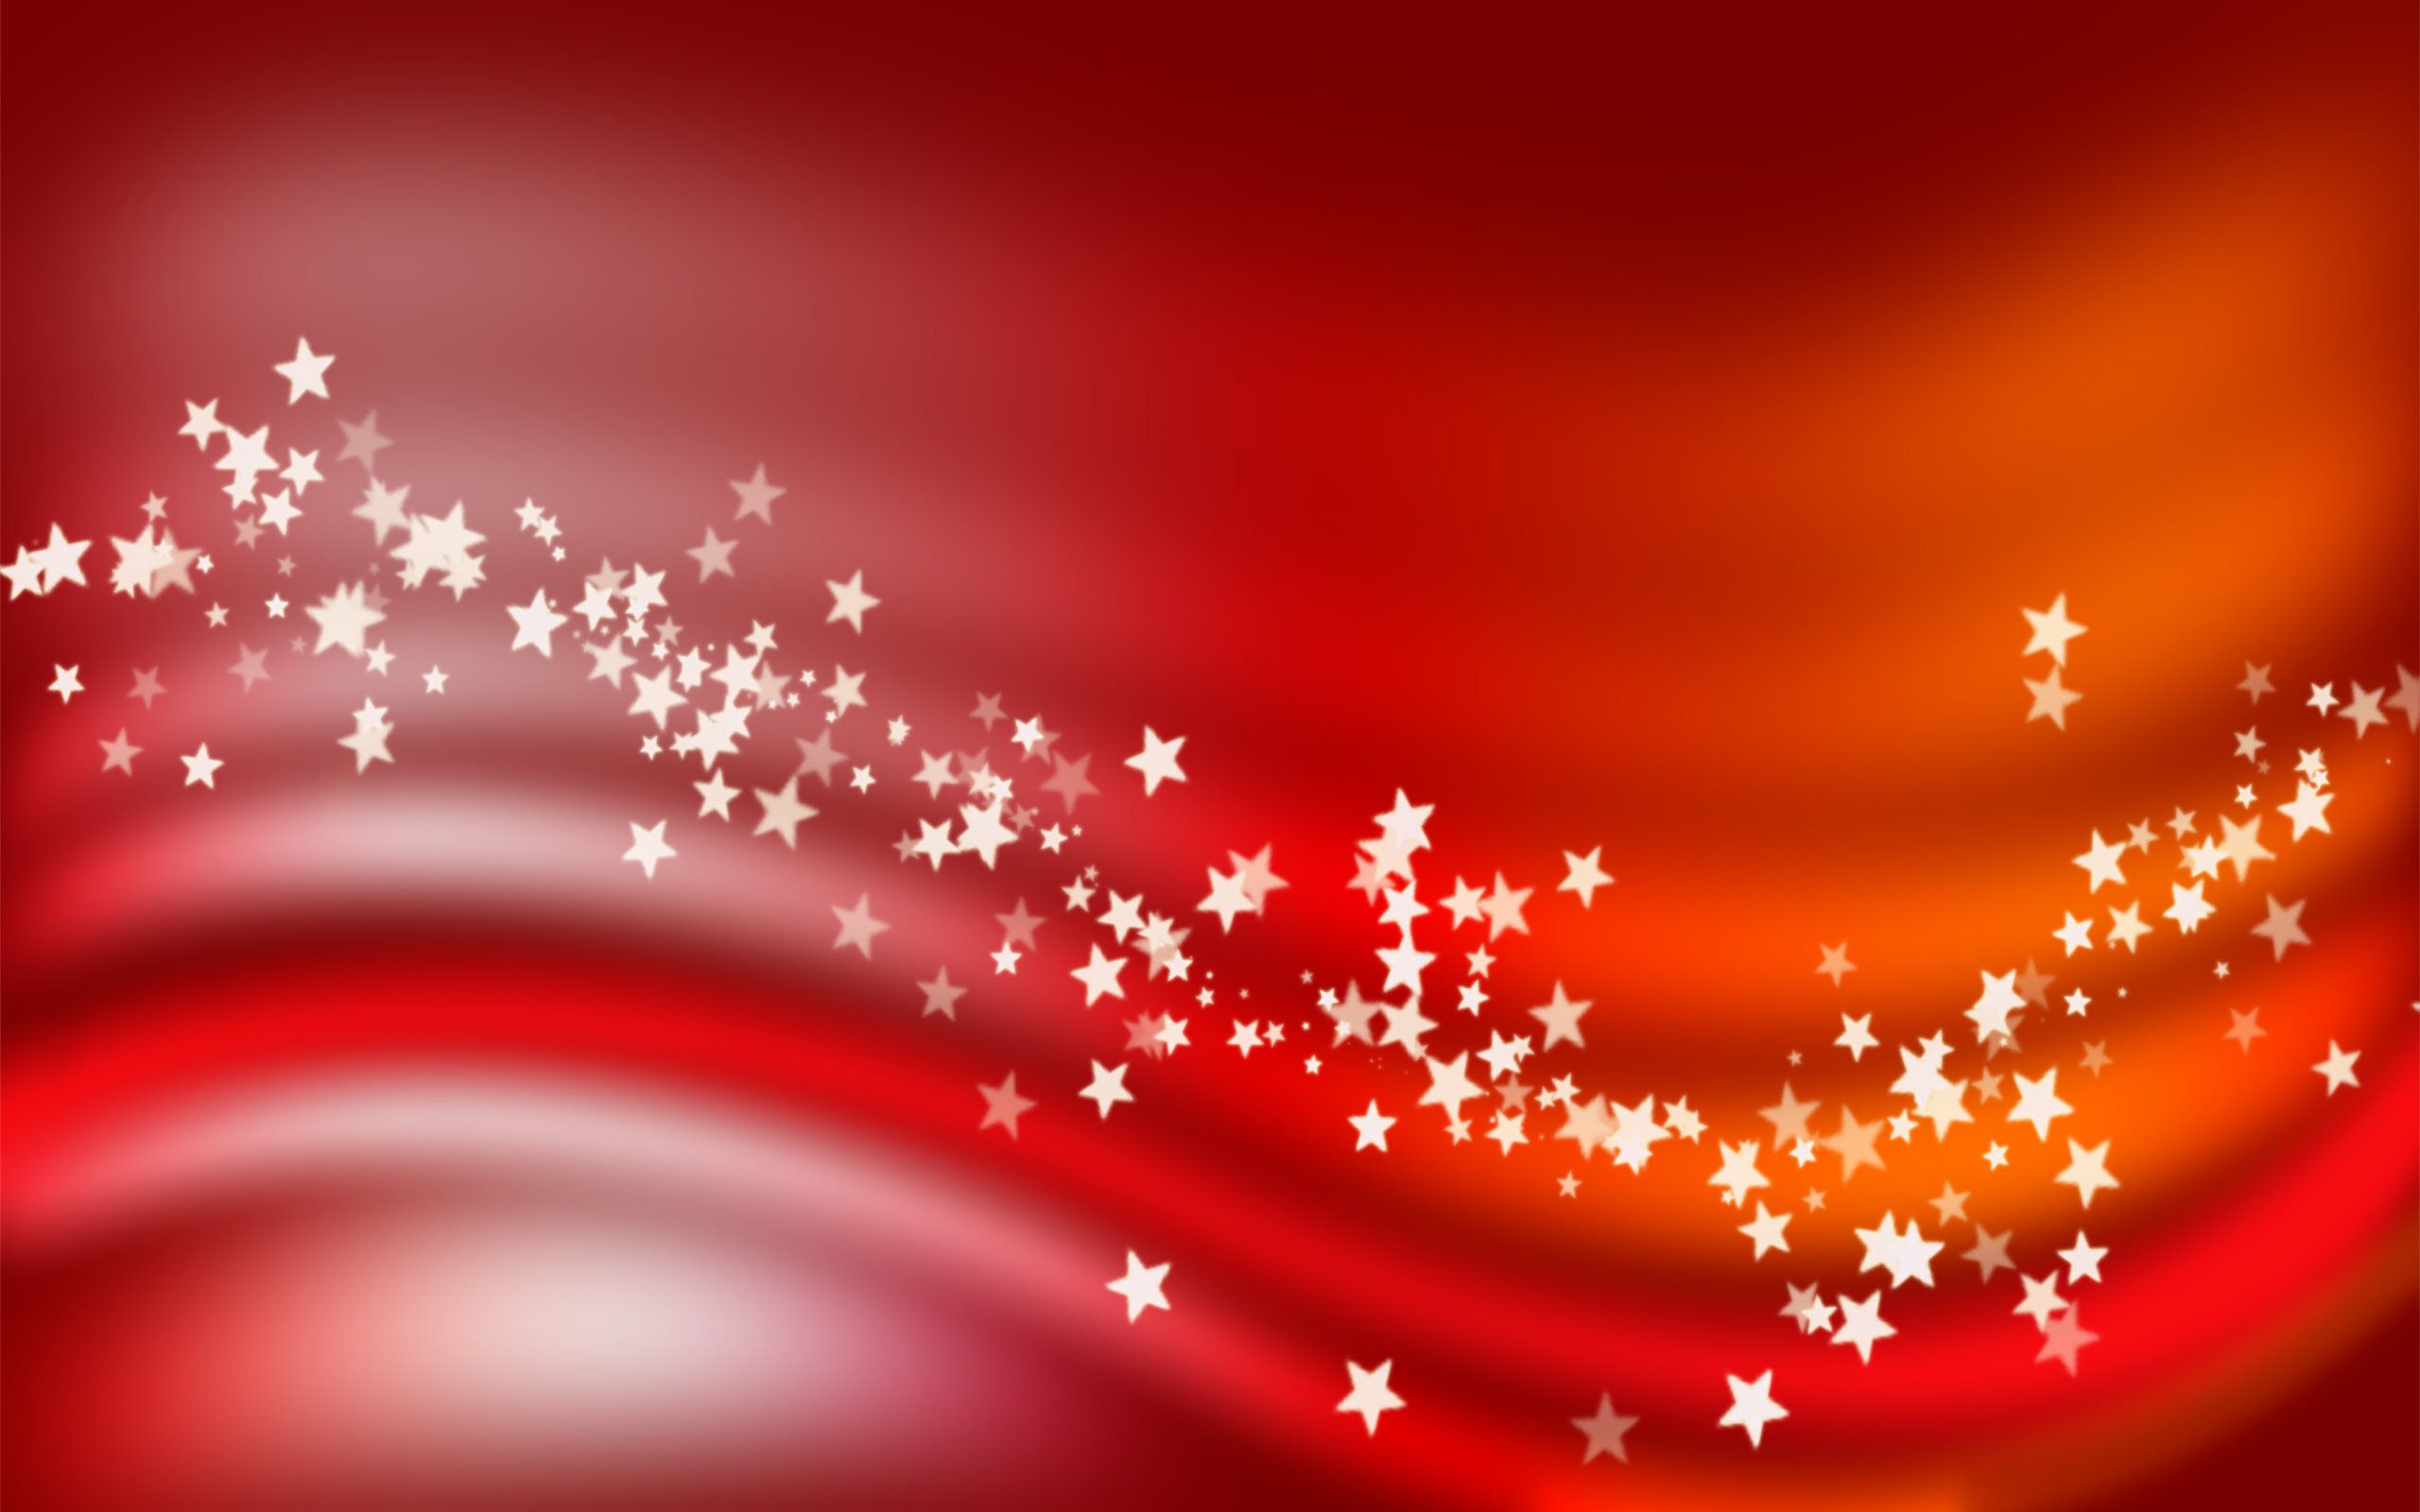 Red Facebook Background. Red Christmas Wallpaper, Red Victorian Wallpaper and Red Wallpaper